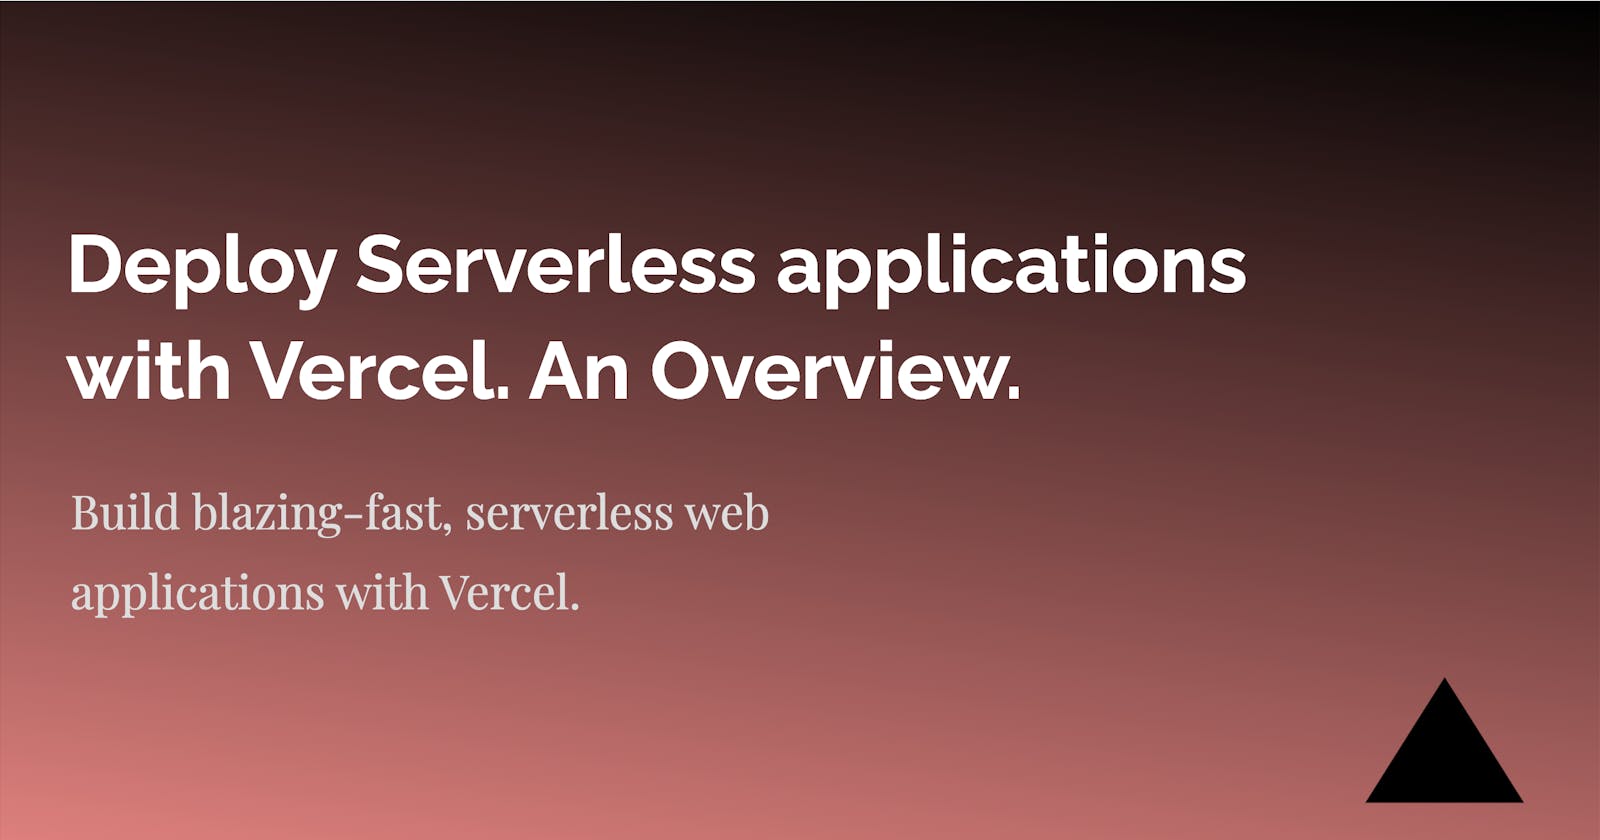 Deploy Serverless applications with Vercel. An Overview.